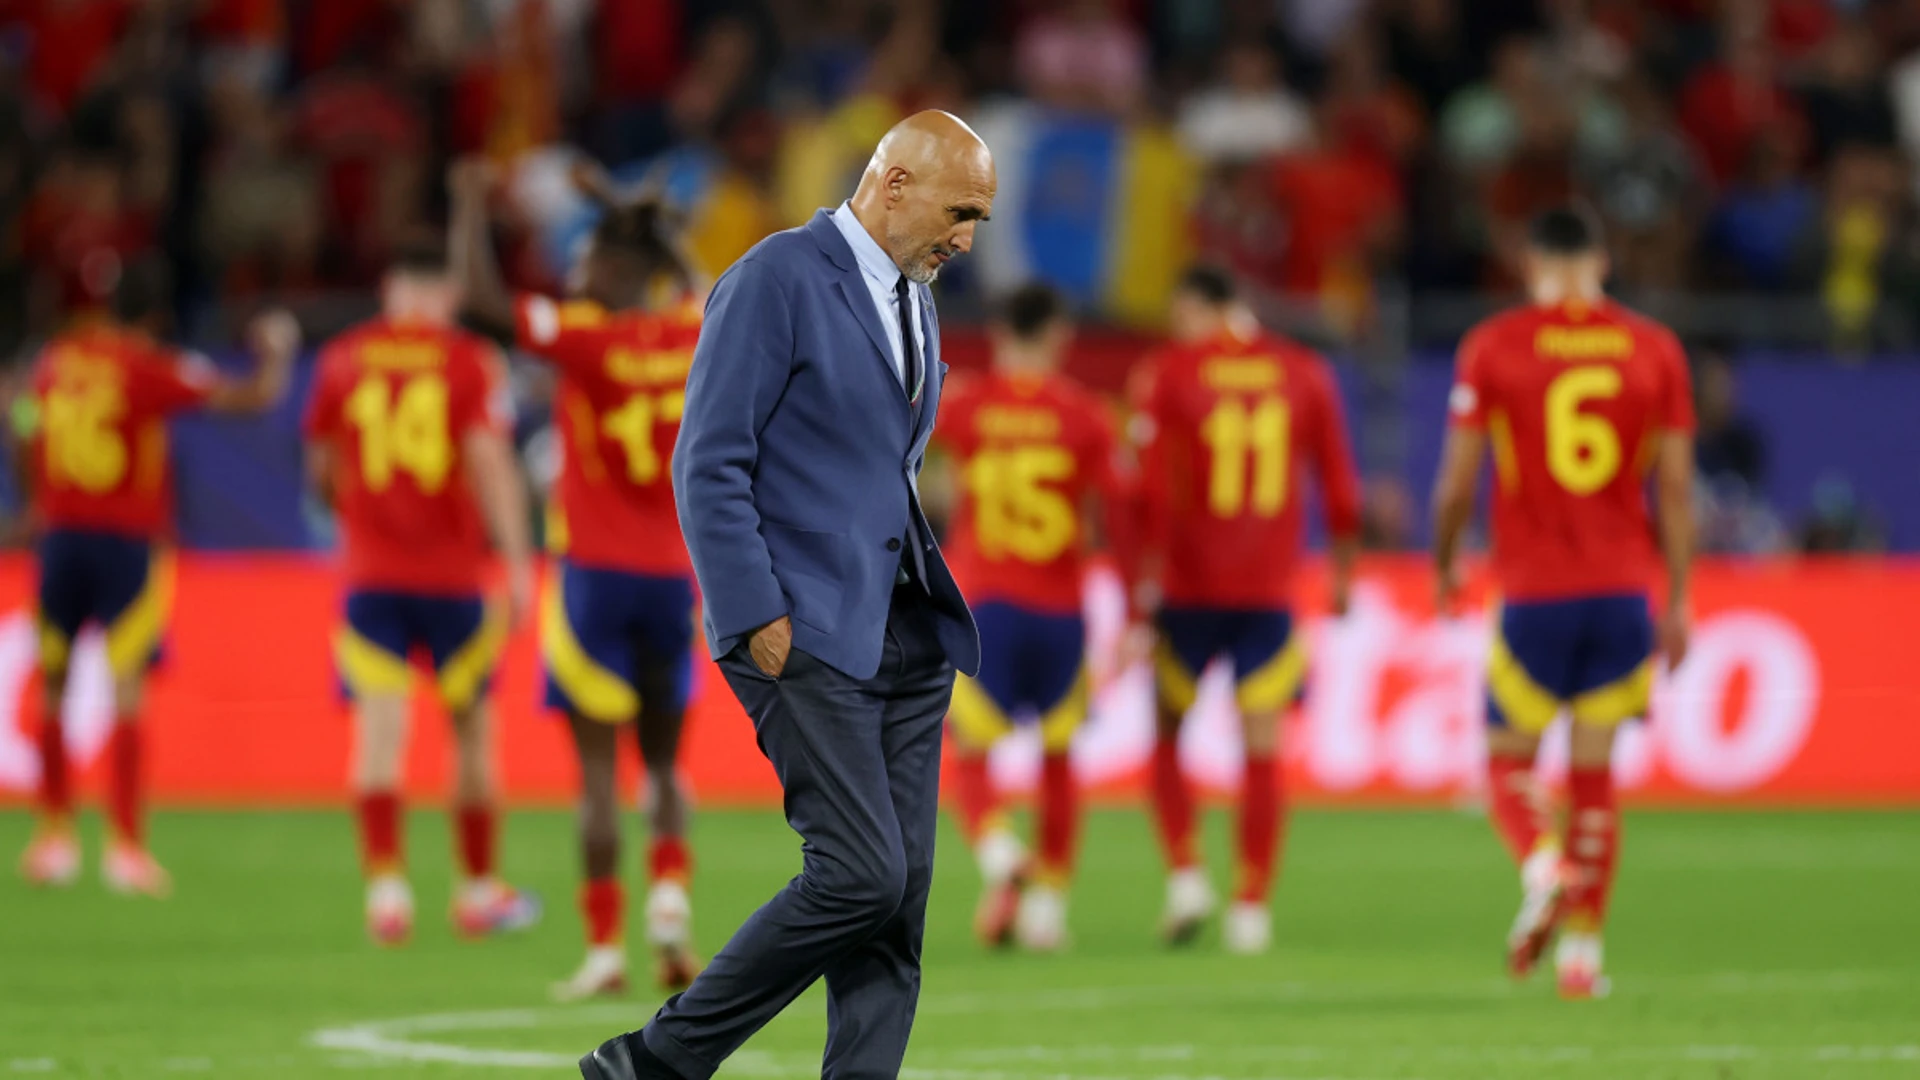 Spalletti wants Italy to copy Spain after Euros humbling